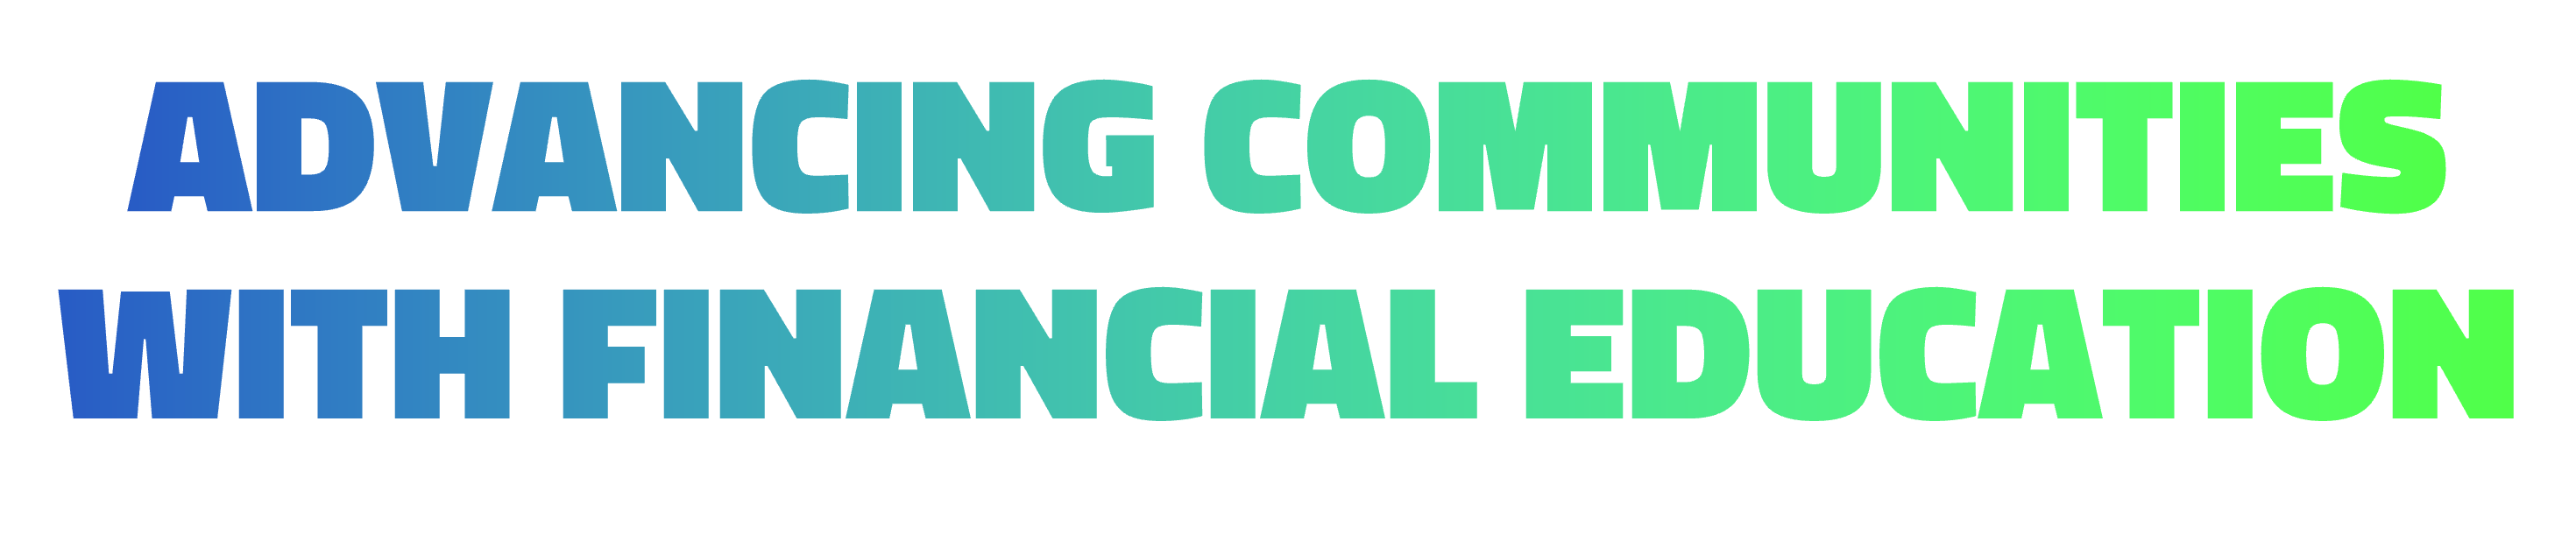 Advancing Communities With Financial Education